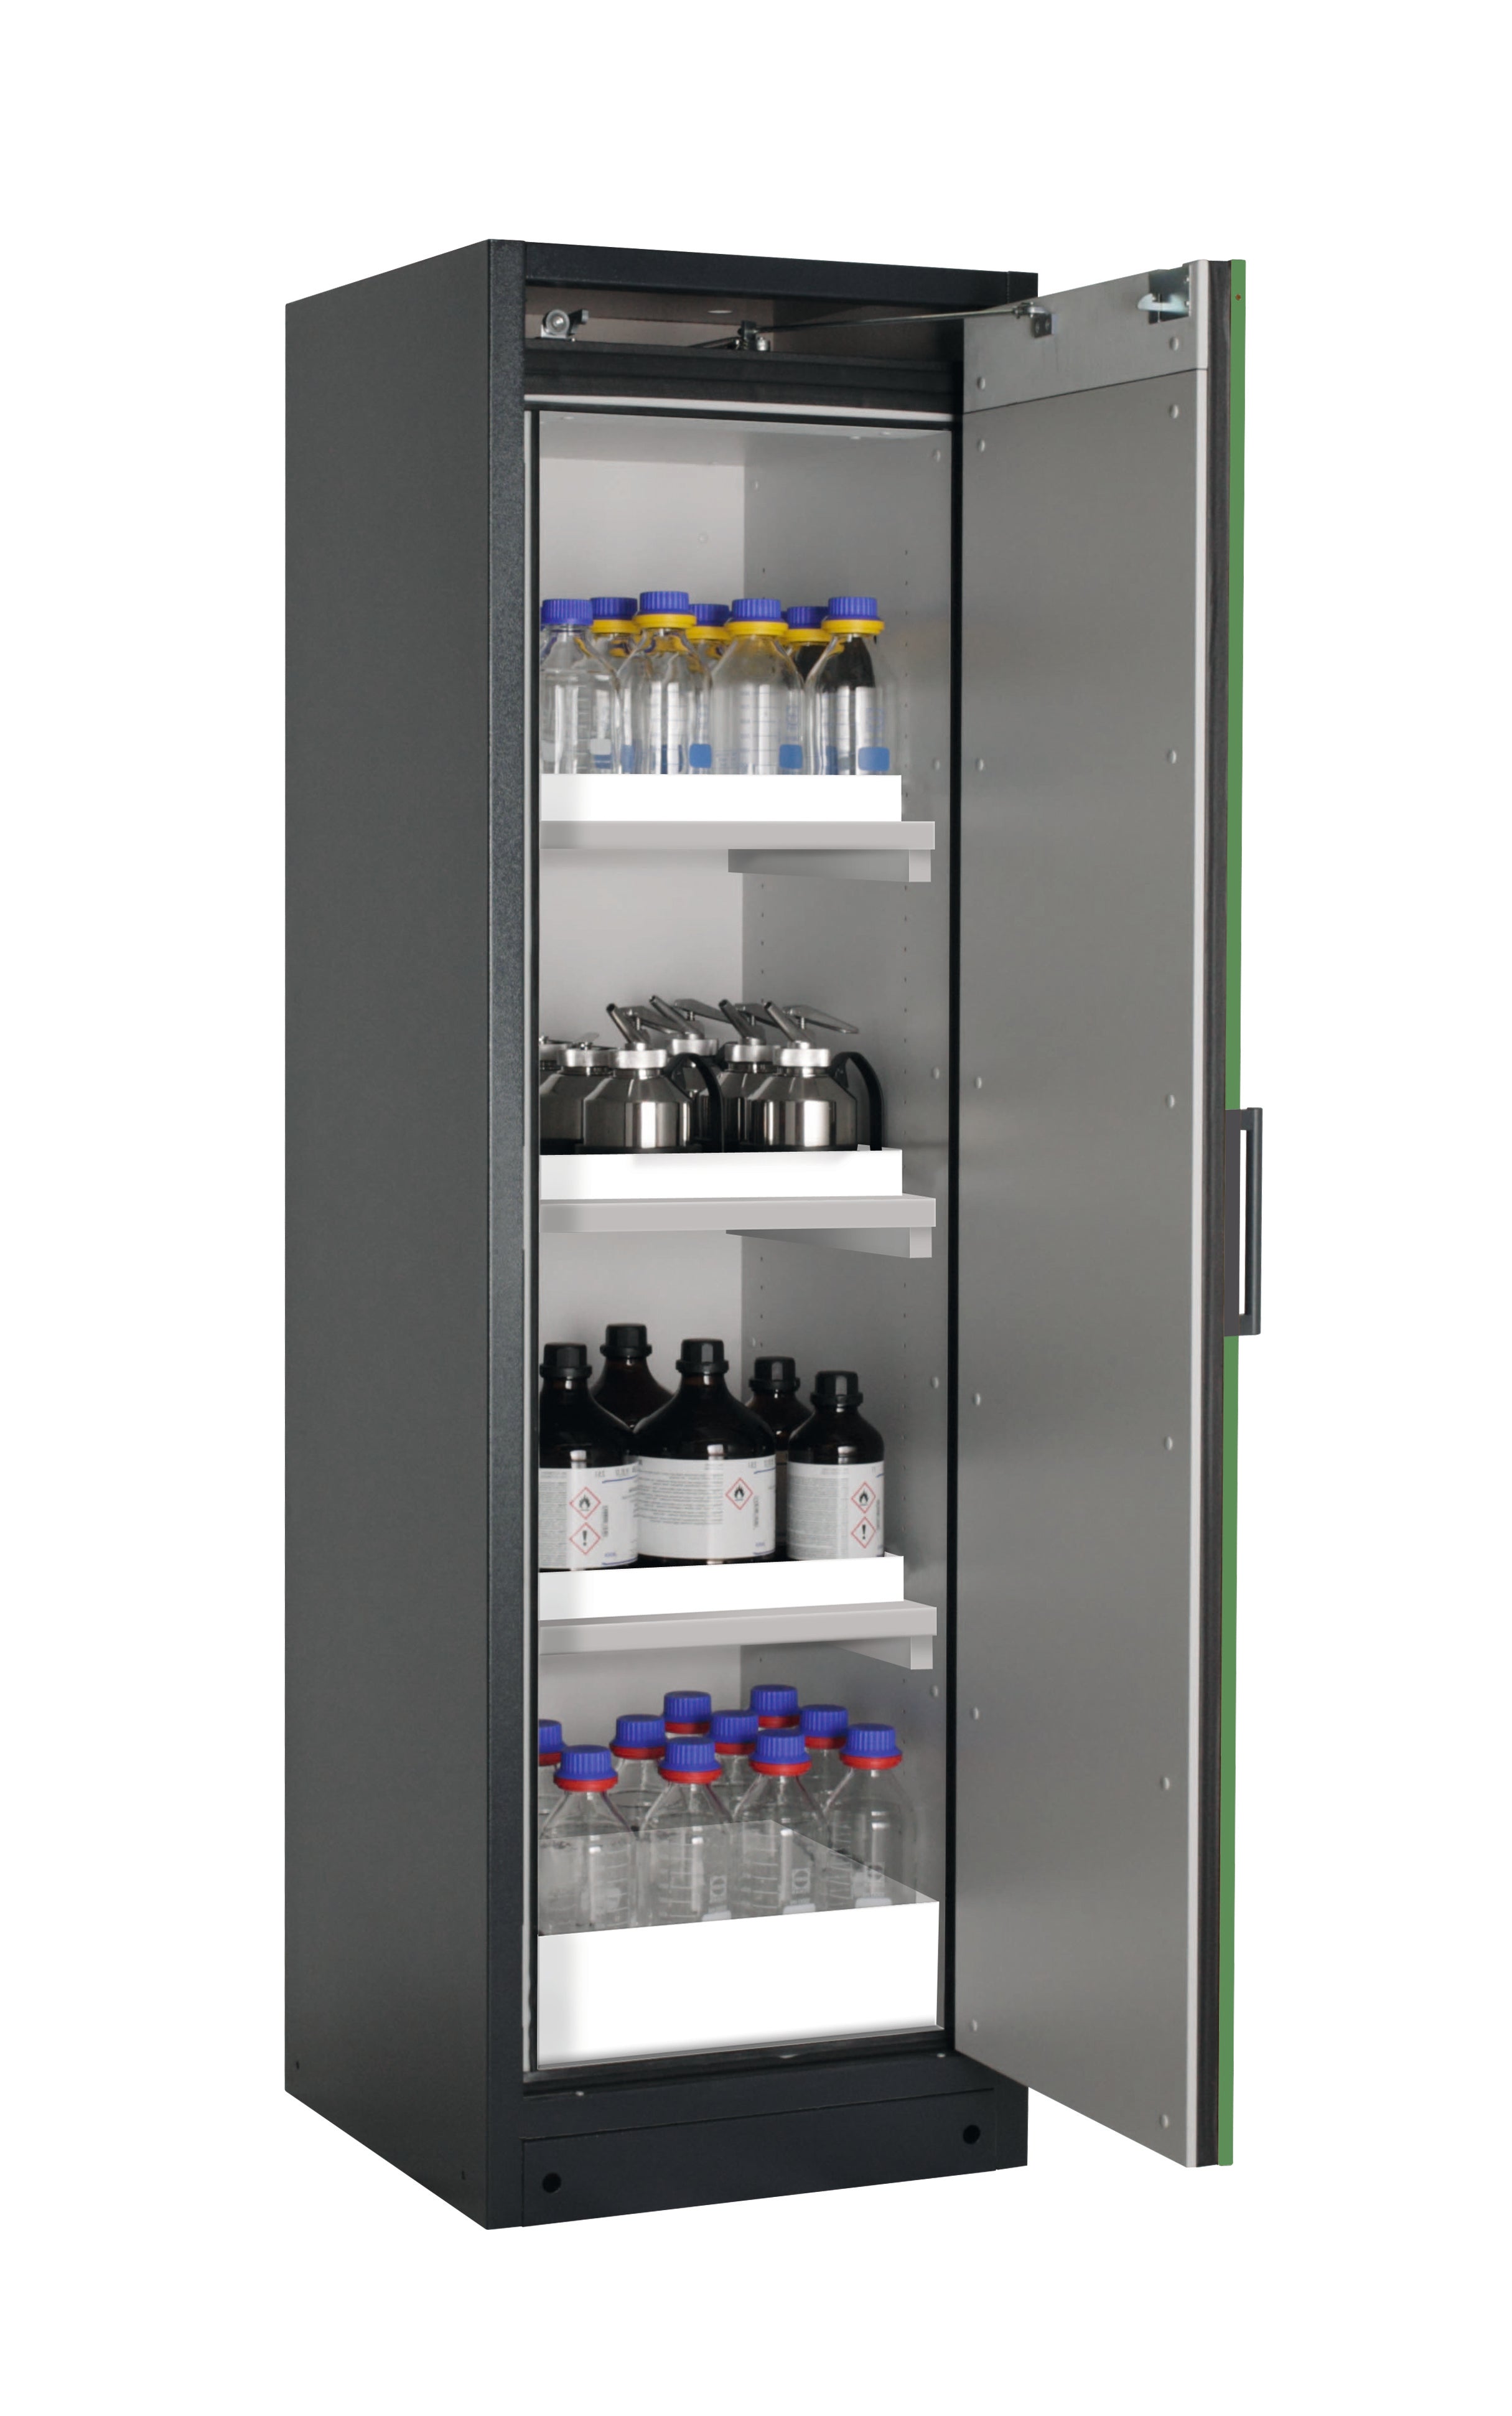 Type 90 safety storage cabinet Q-CLASSIC-90 model Q90.195.060.R in reseda green RAL 6011 with 3x tray shelf (standard) (polypropylene),